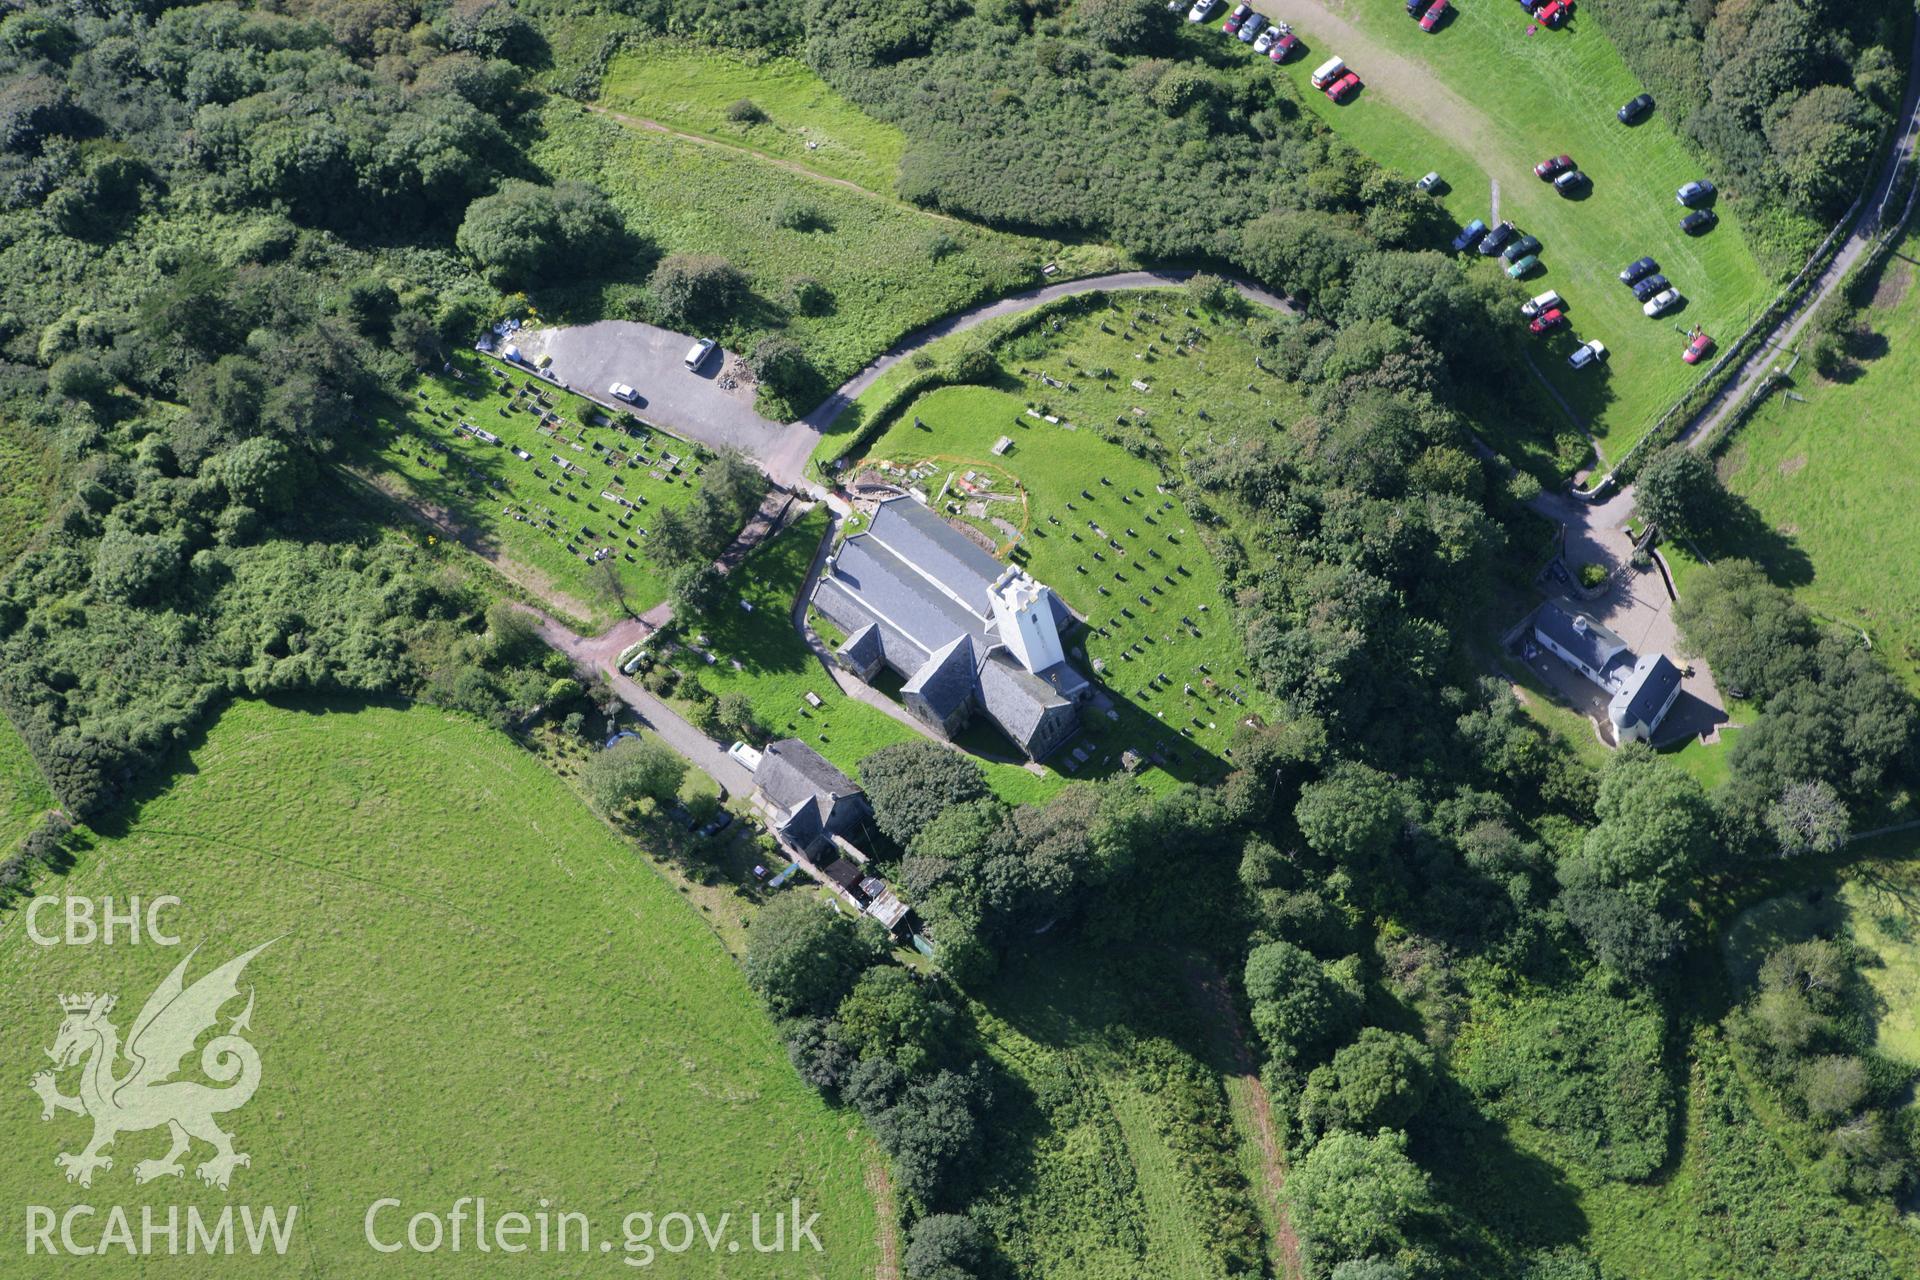 RCAHMW colour oblique aerial photograph of St James' Church, Manorbier. Taken on 30 July 2007 by Toby Driver